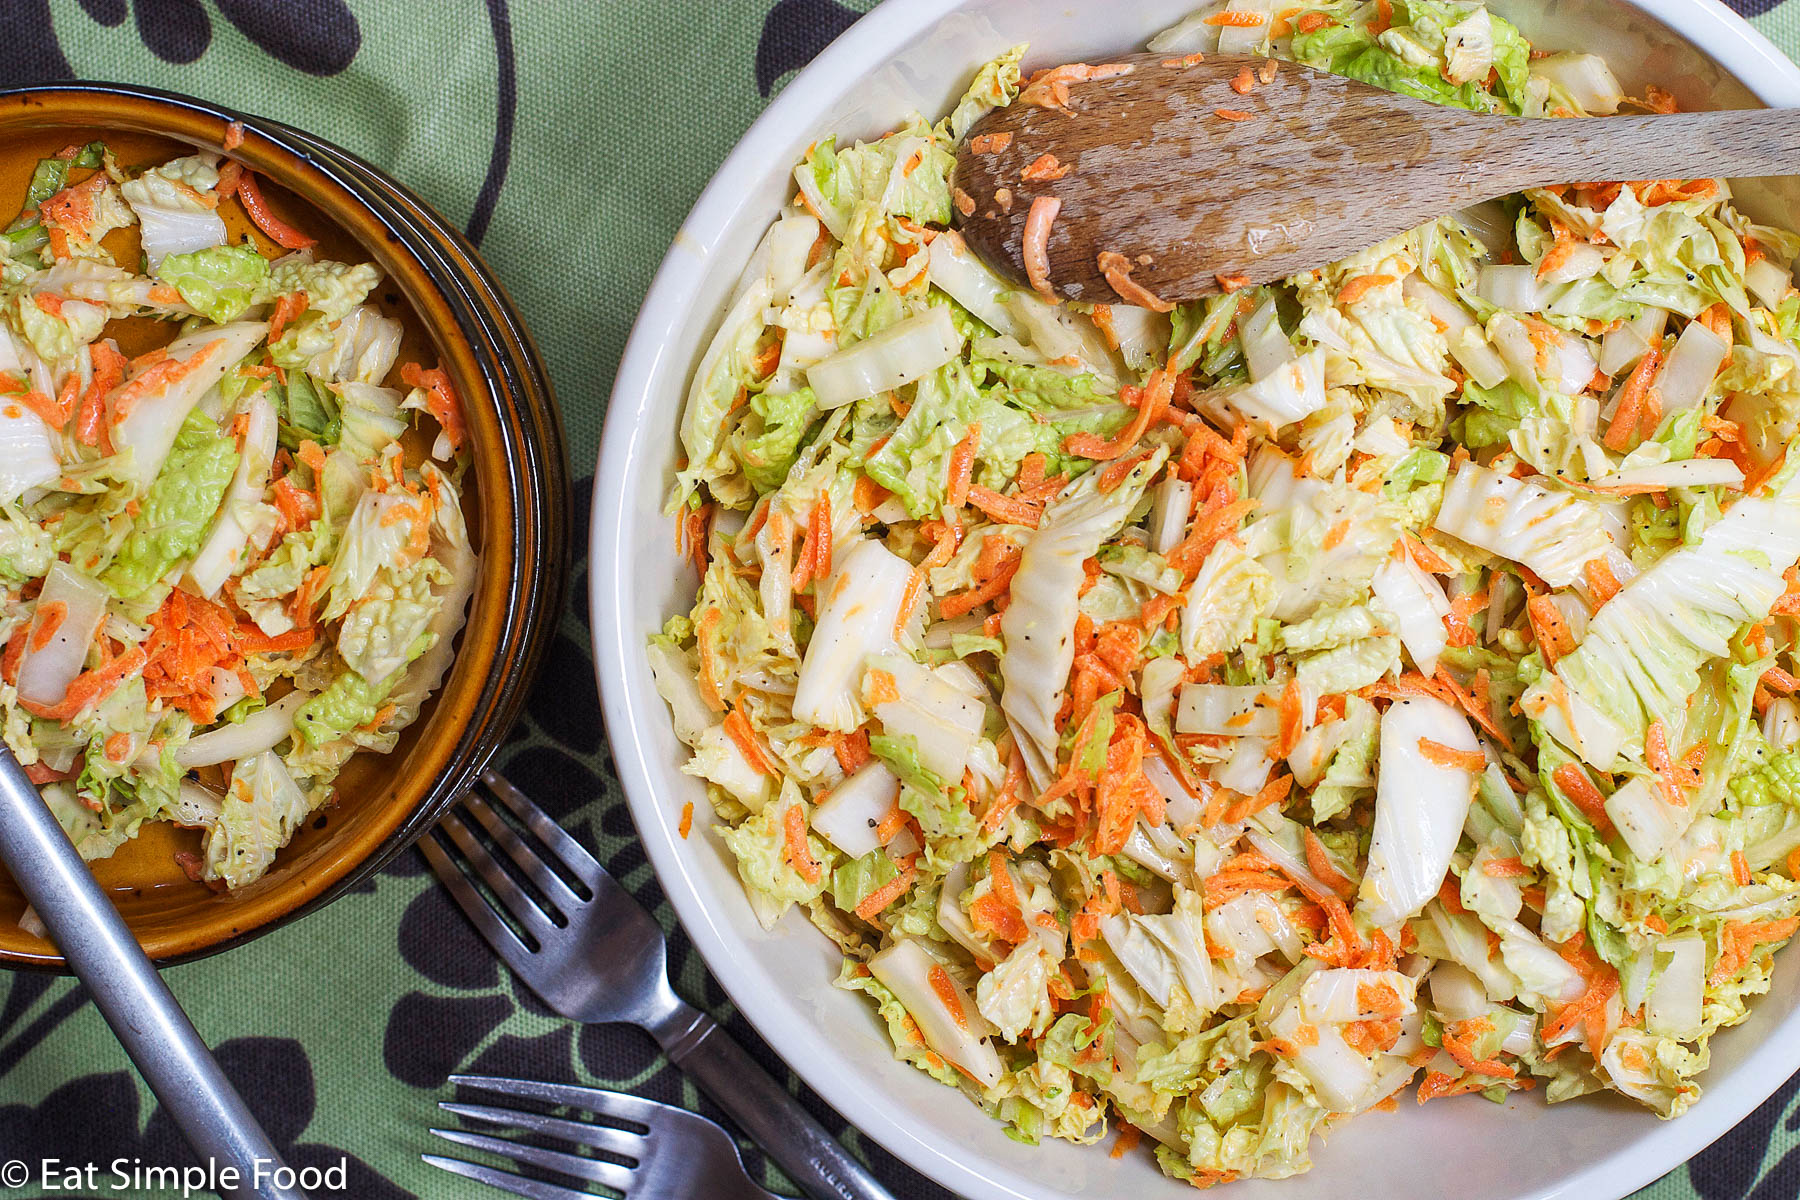 Top view of a bowl of cole slaw: cabbage and grated carrots in a white bowl. Forks on the side.